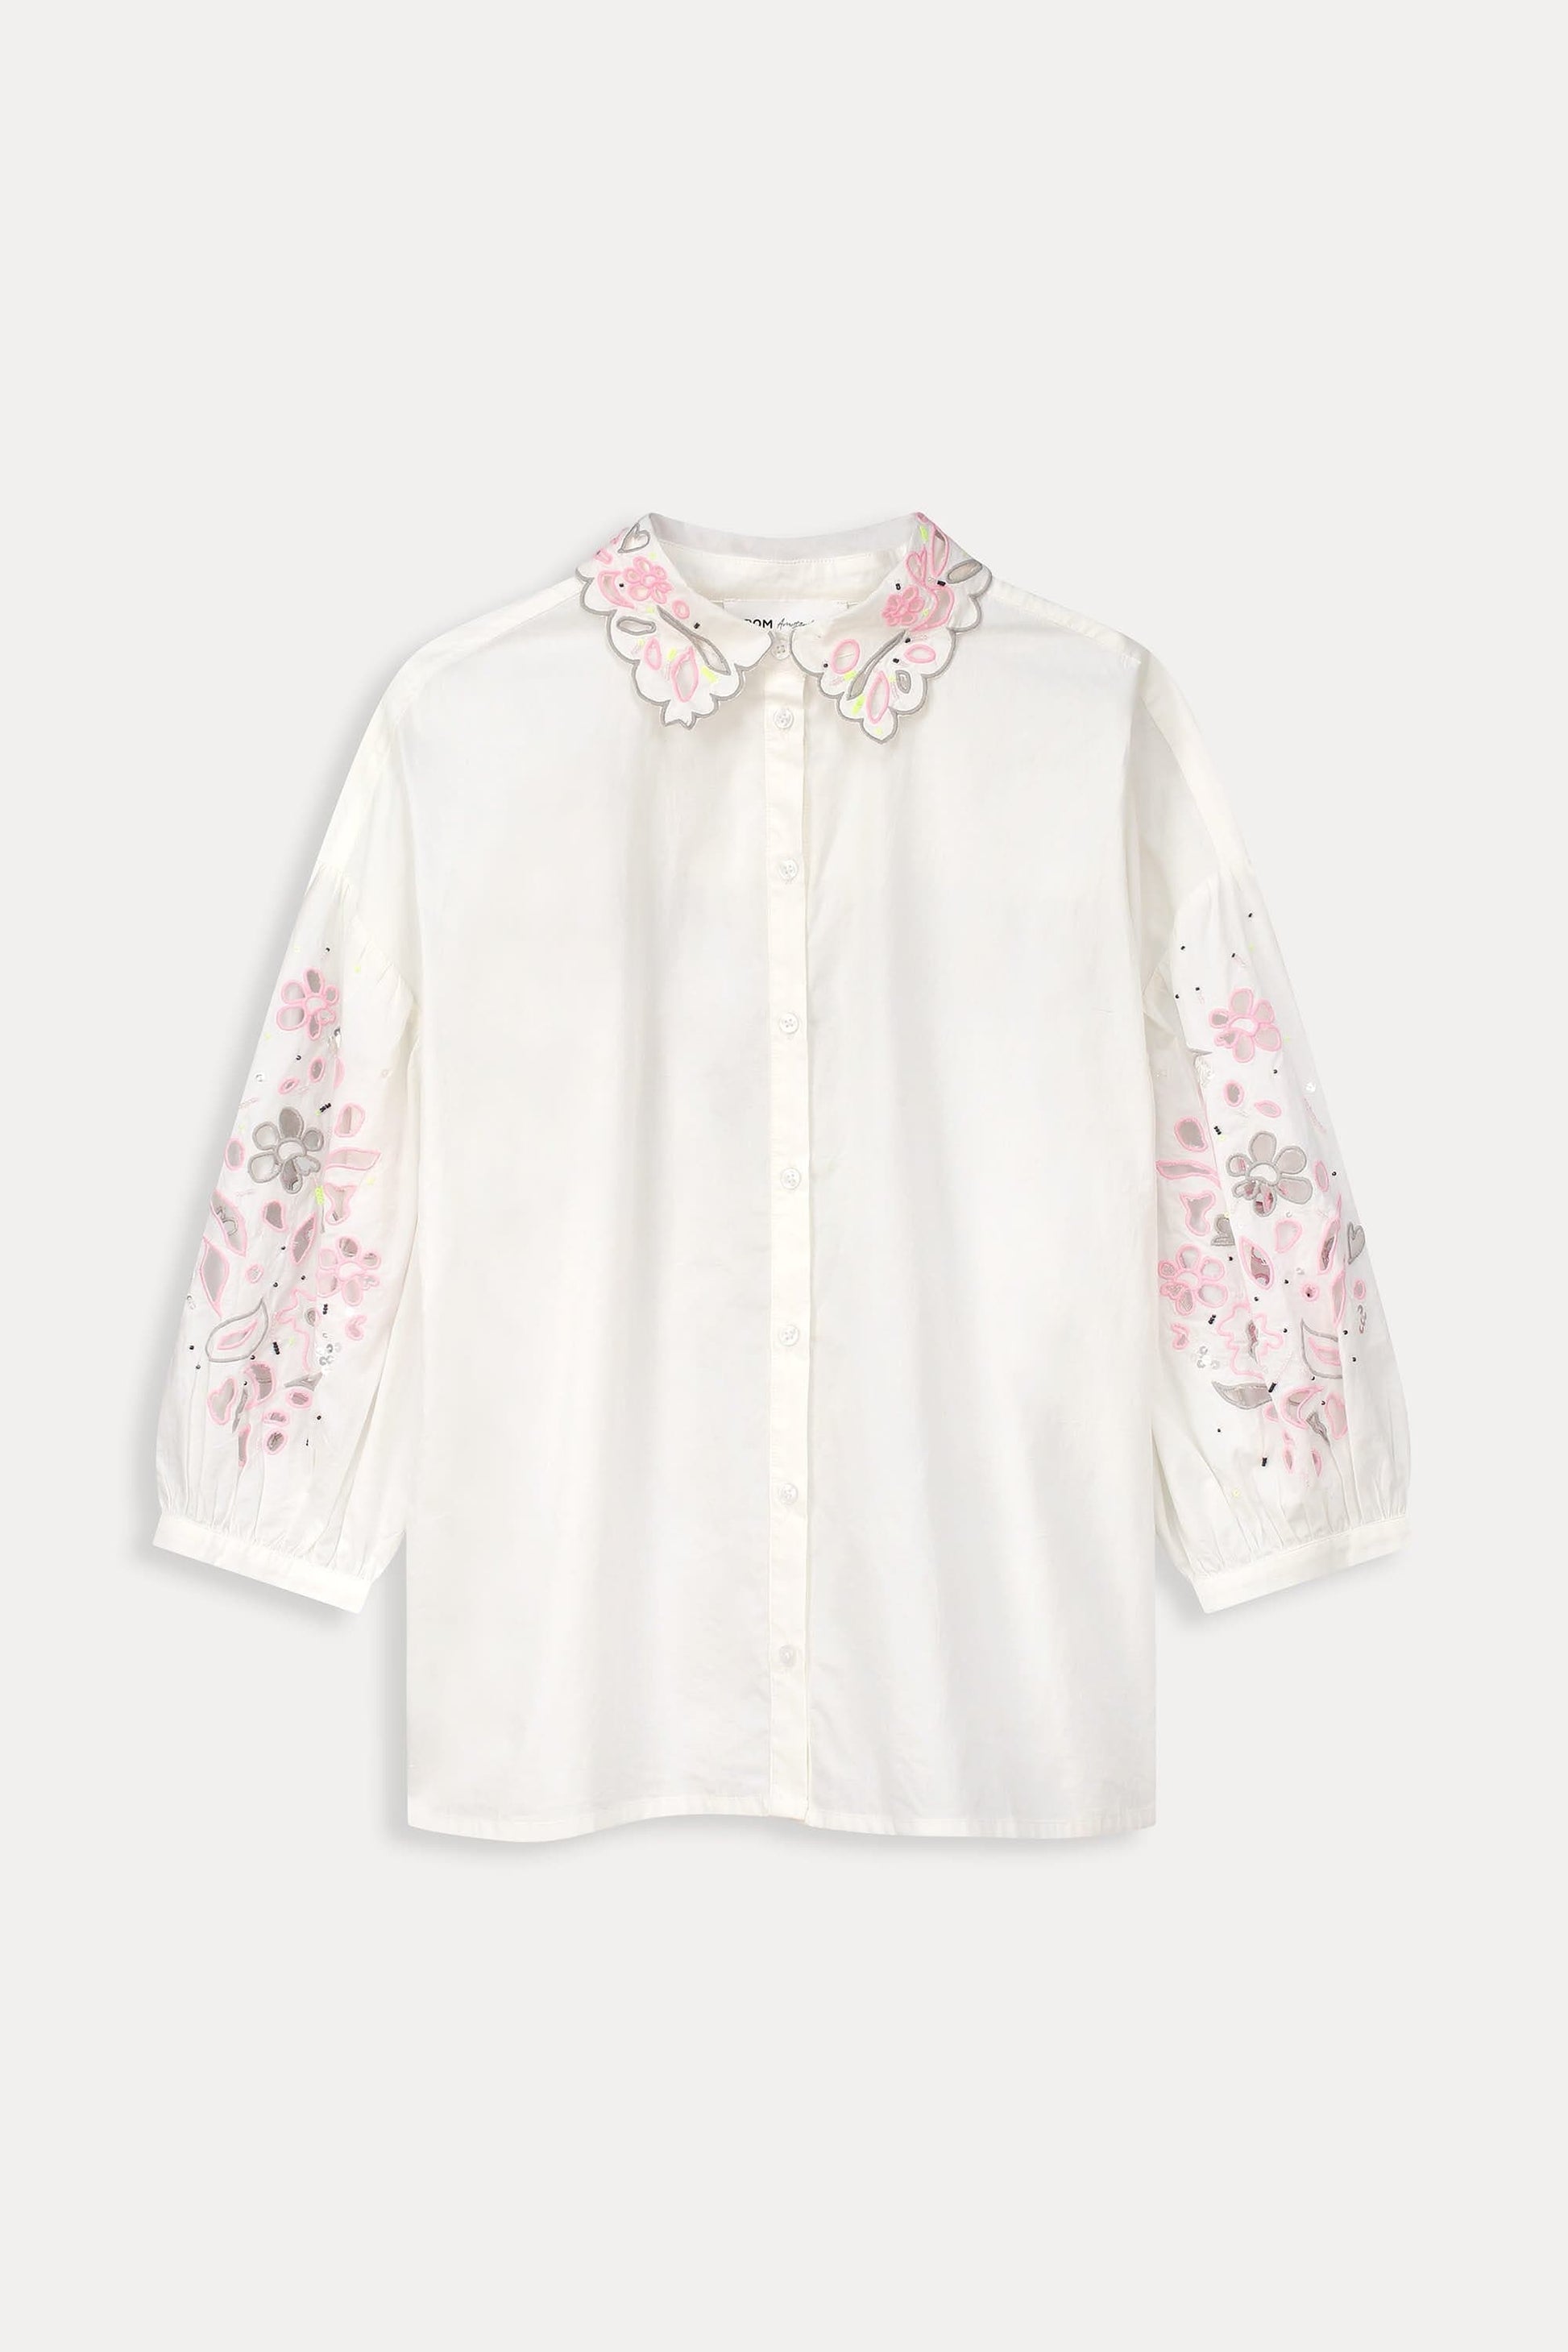 POM Amsterdam Blouses BLOUSE - Embroidery Blooming Ecru